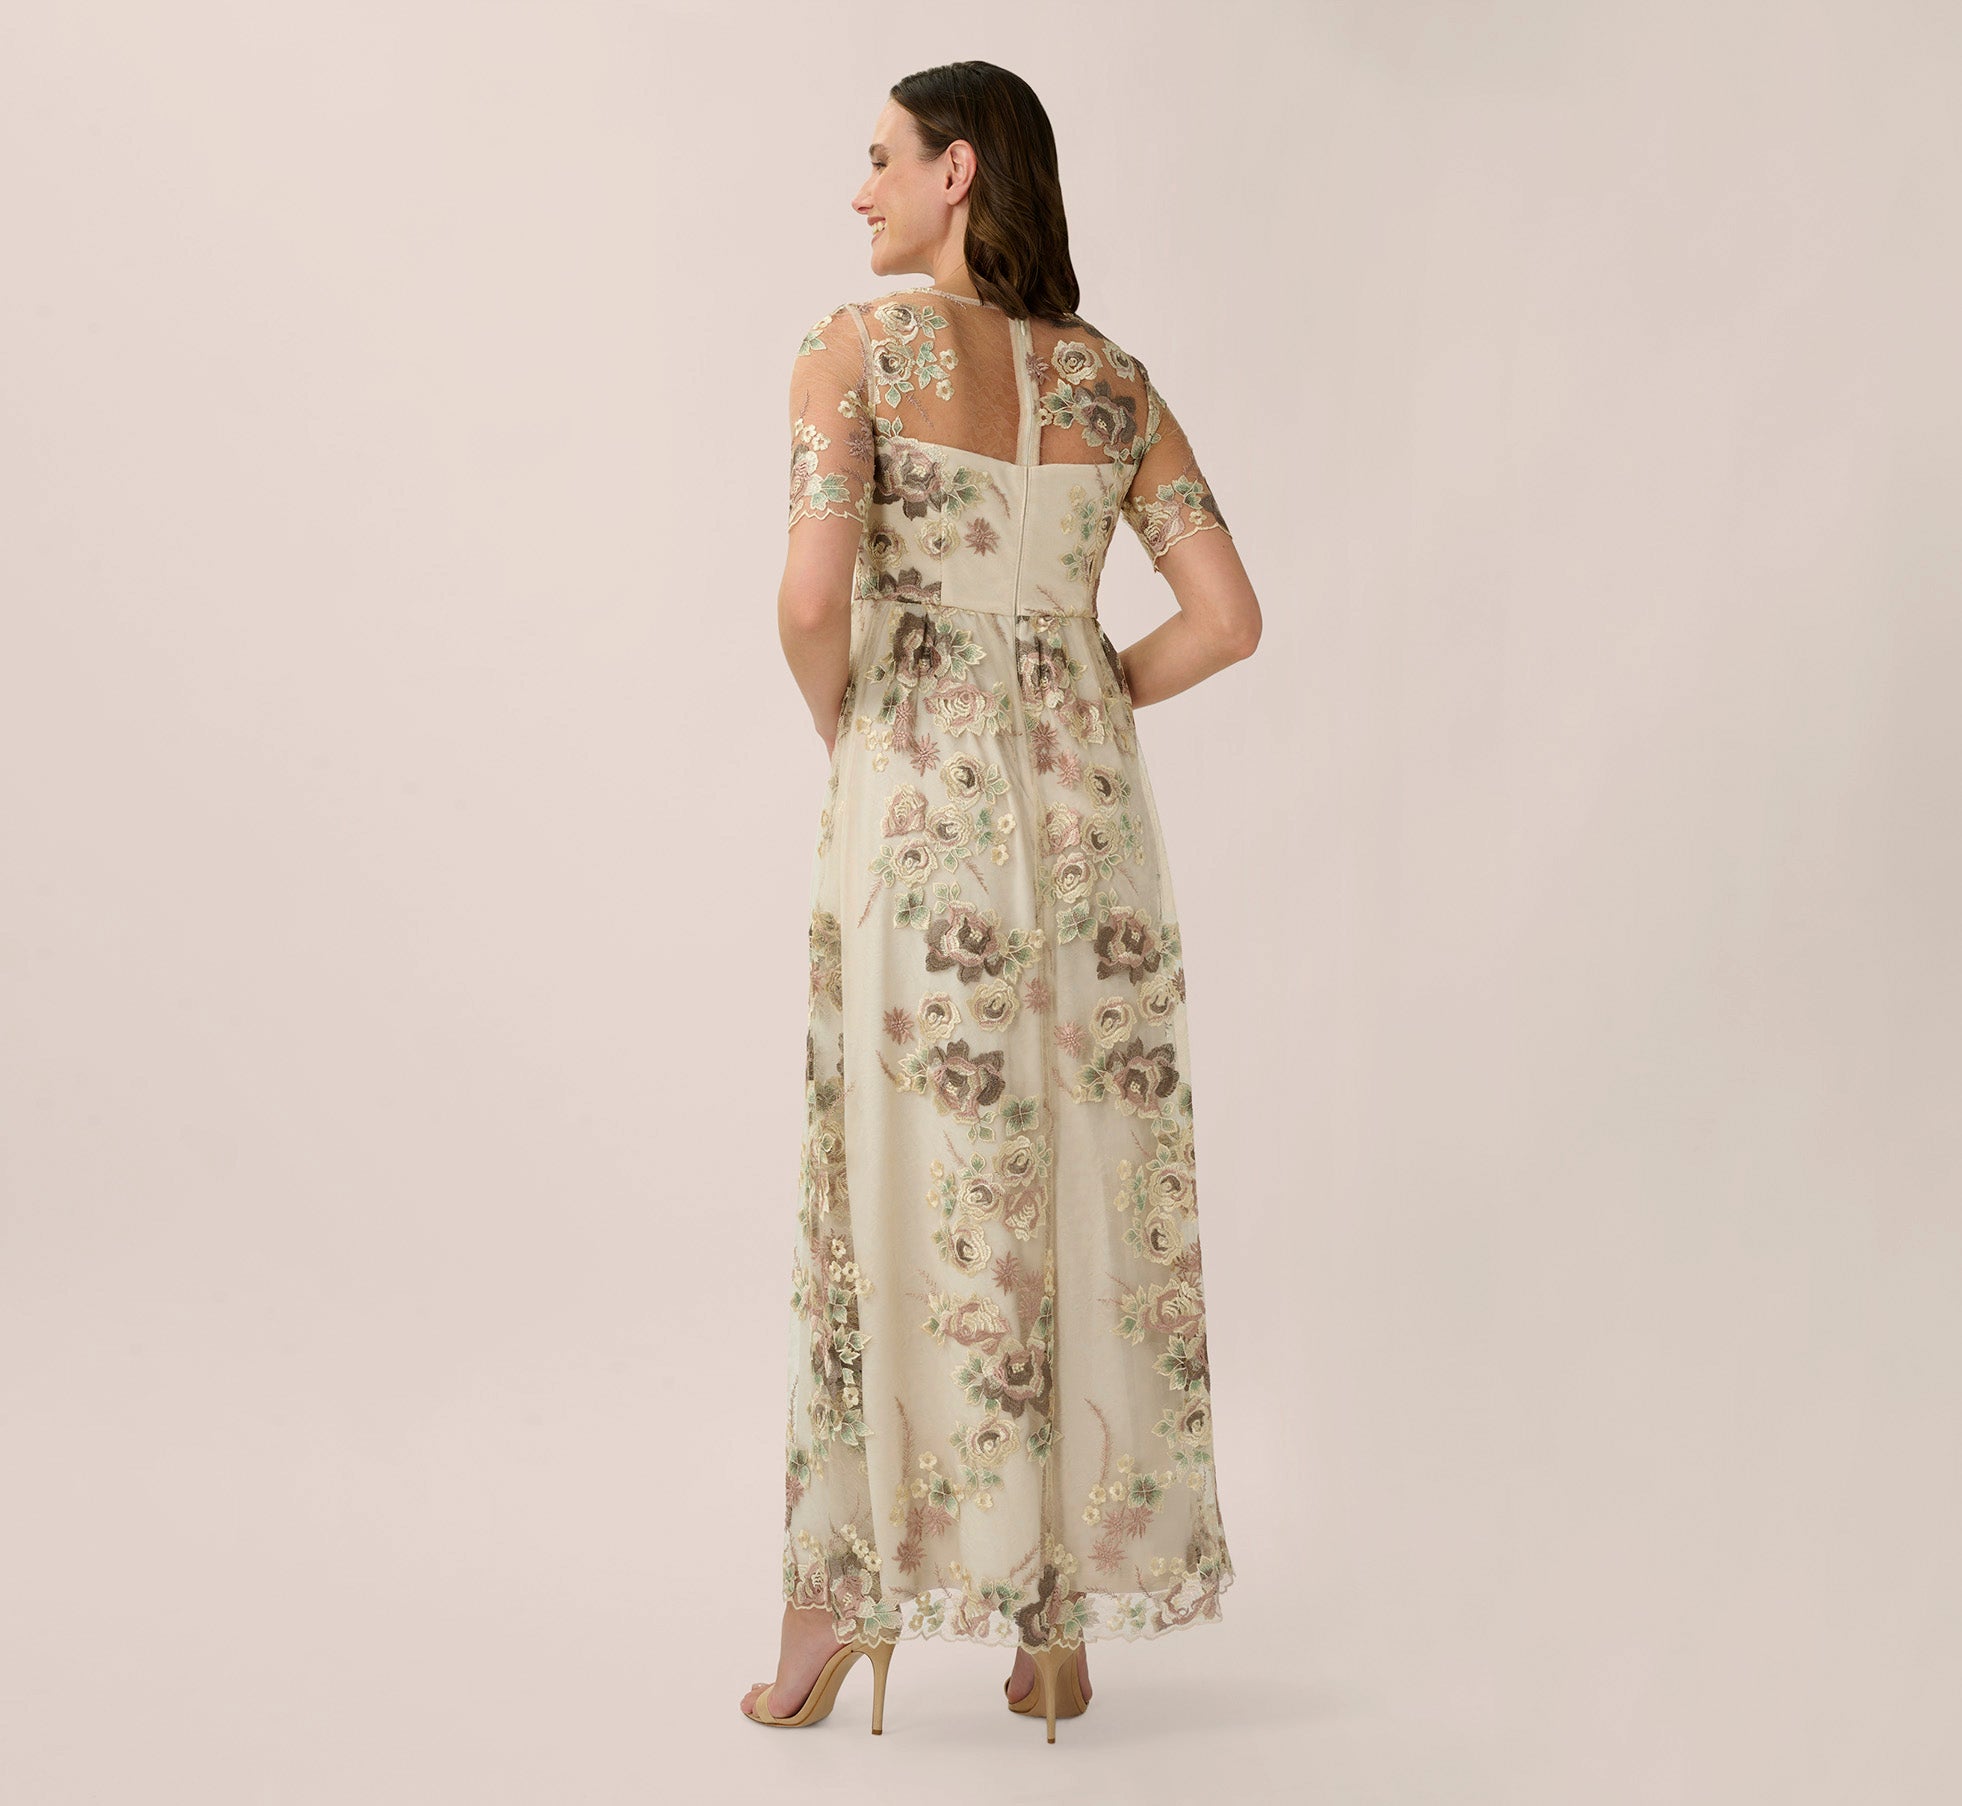 Sheer Short Sleeve Lace Gown With Rose Embroidery In Mink Multi